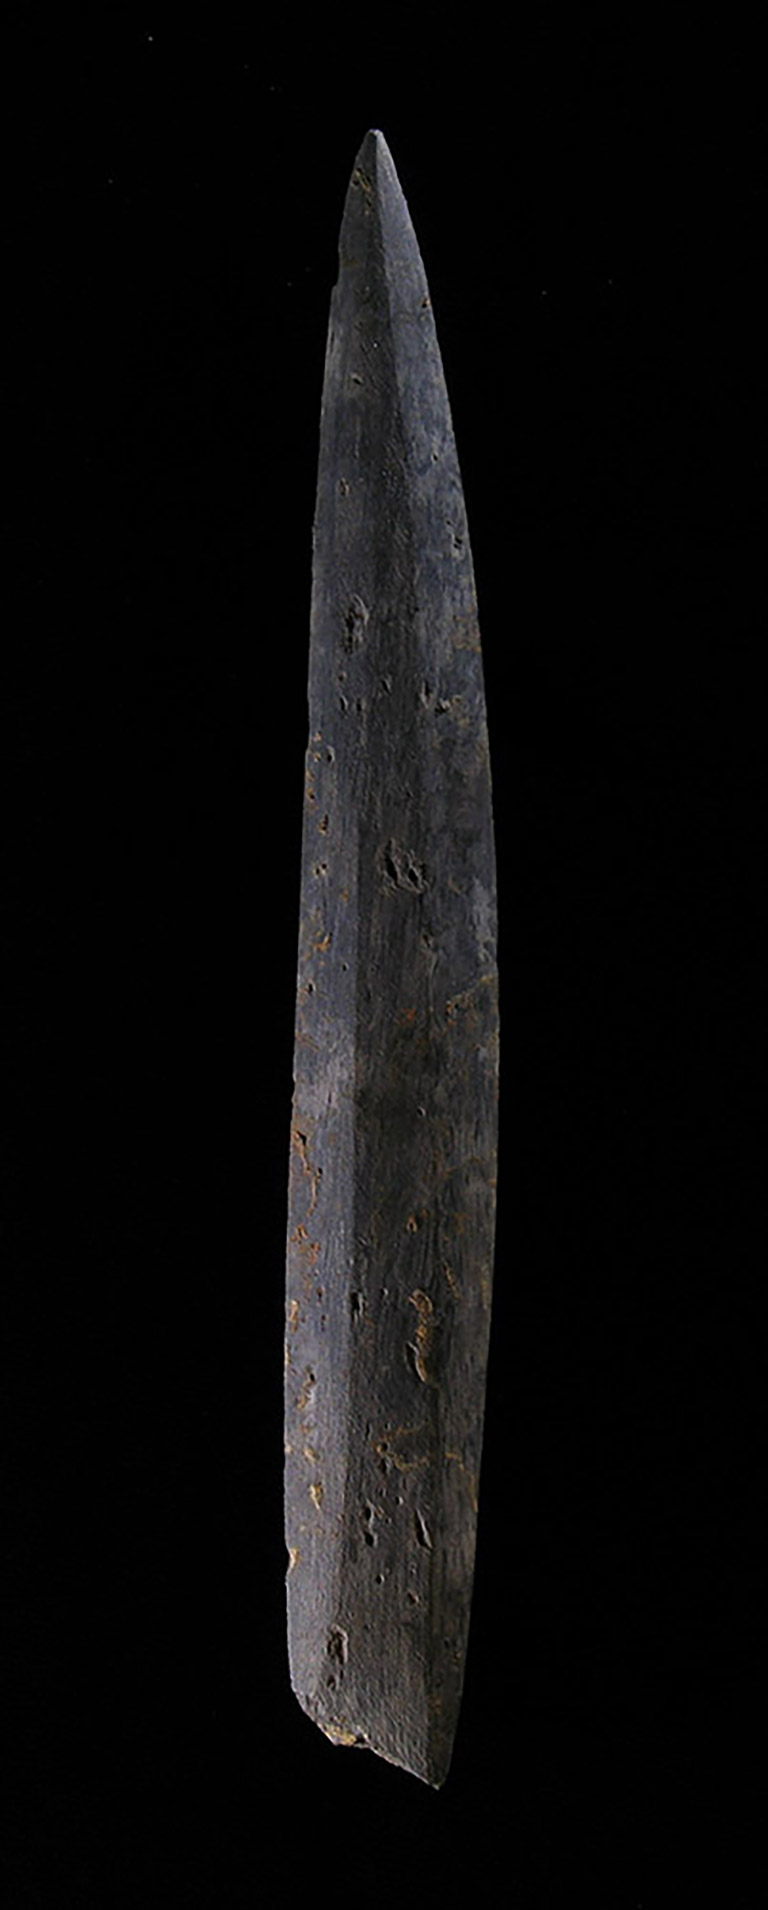 Long, narrow piece of dark stone tapers into a point at the top.